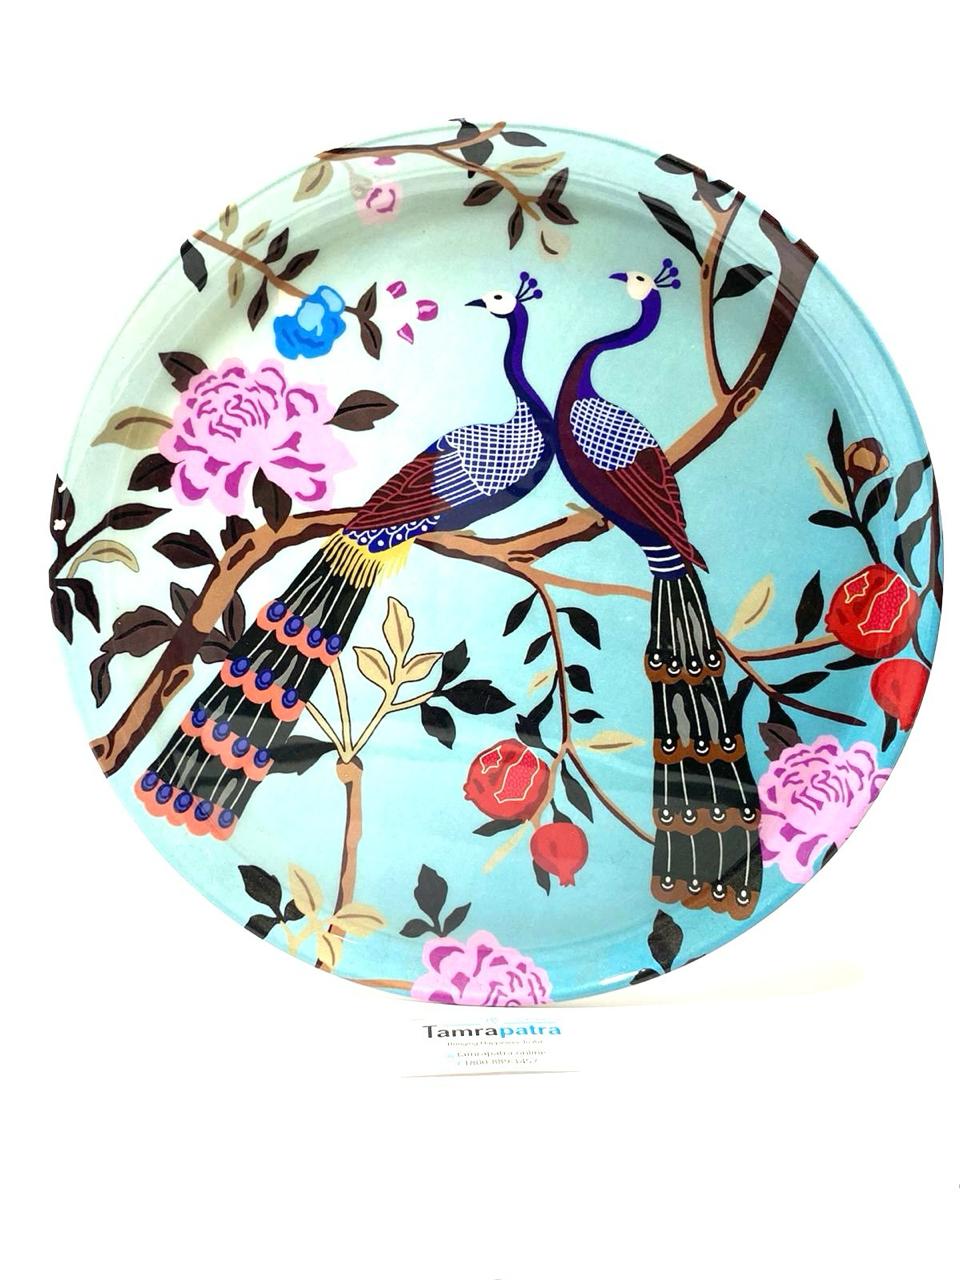 Wall Plates Home Décor Biggest Collection Of Art Handicrafts From Tamrapatra